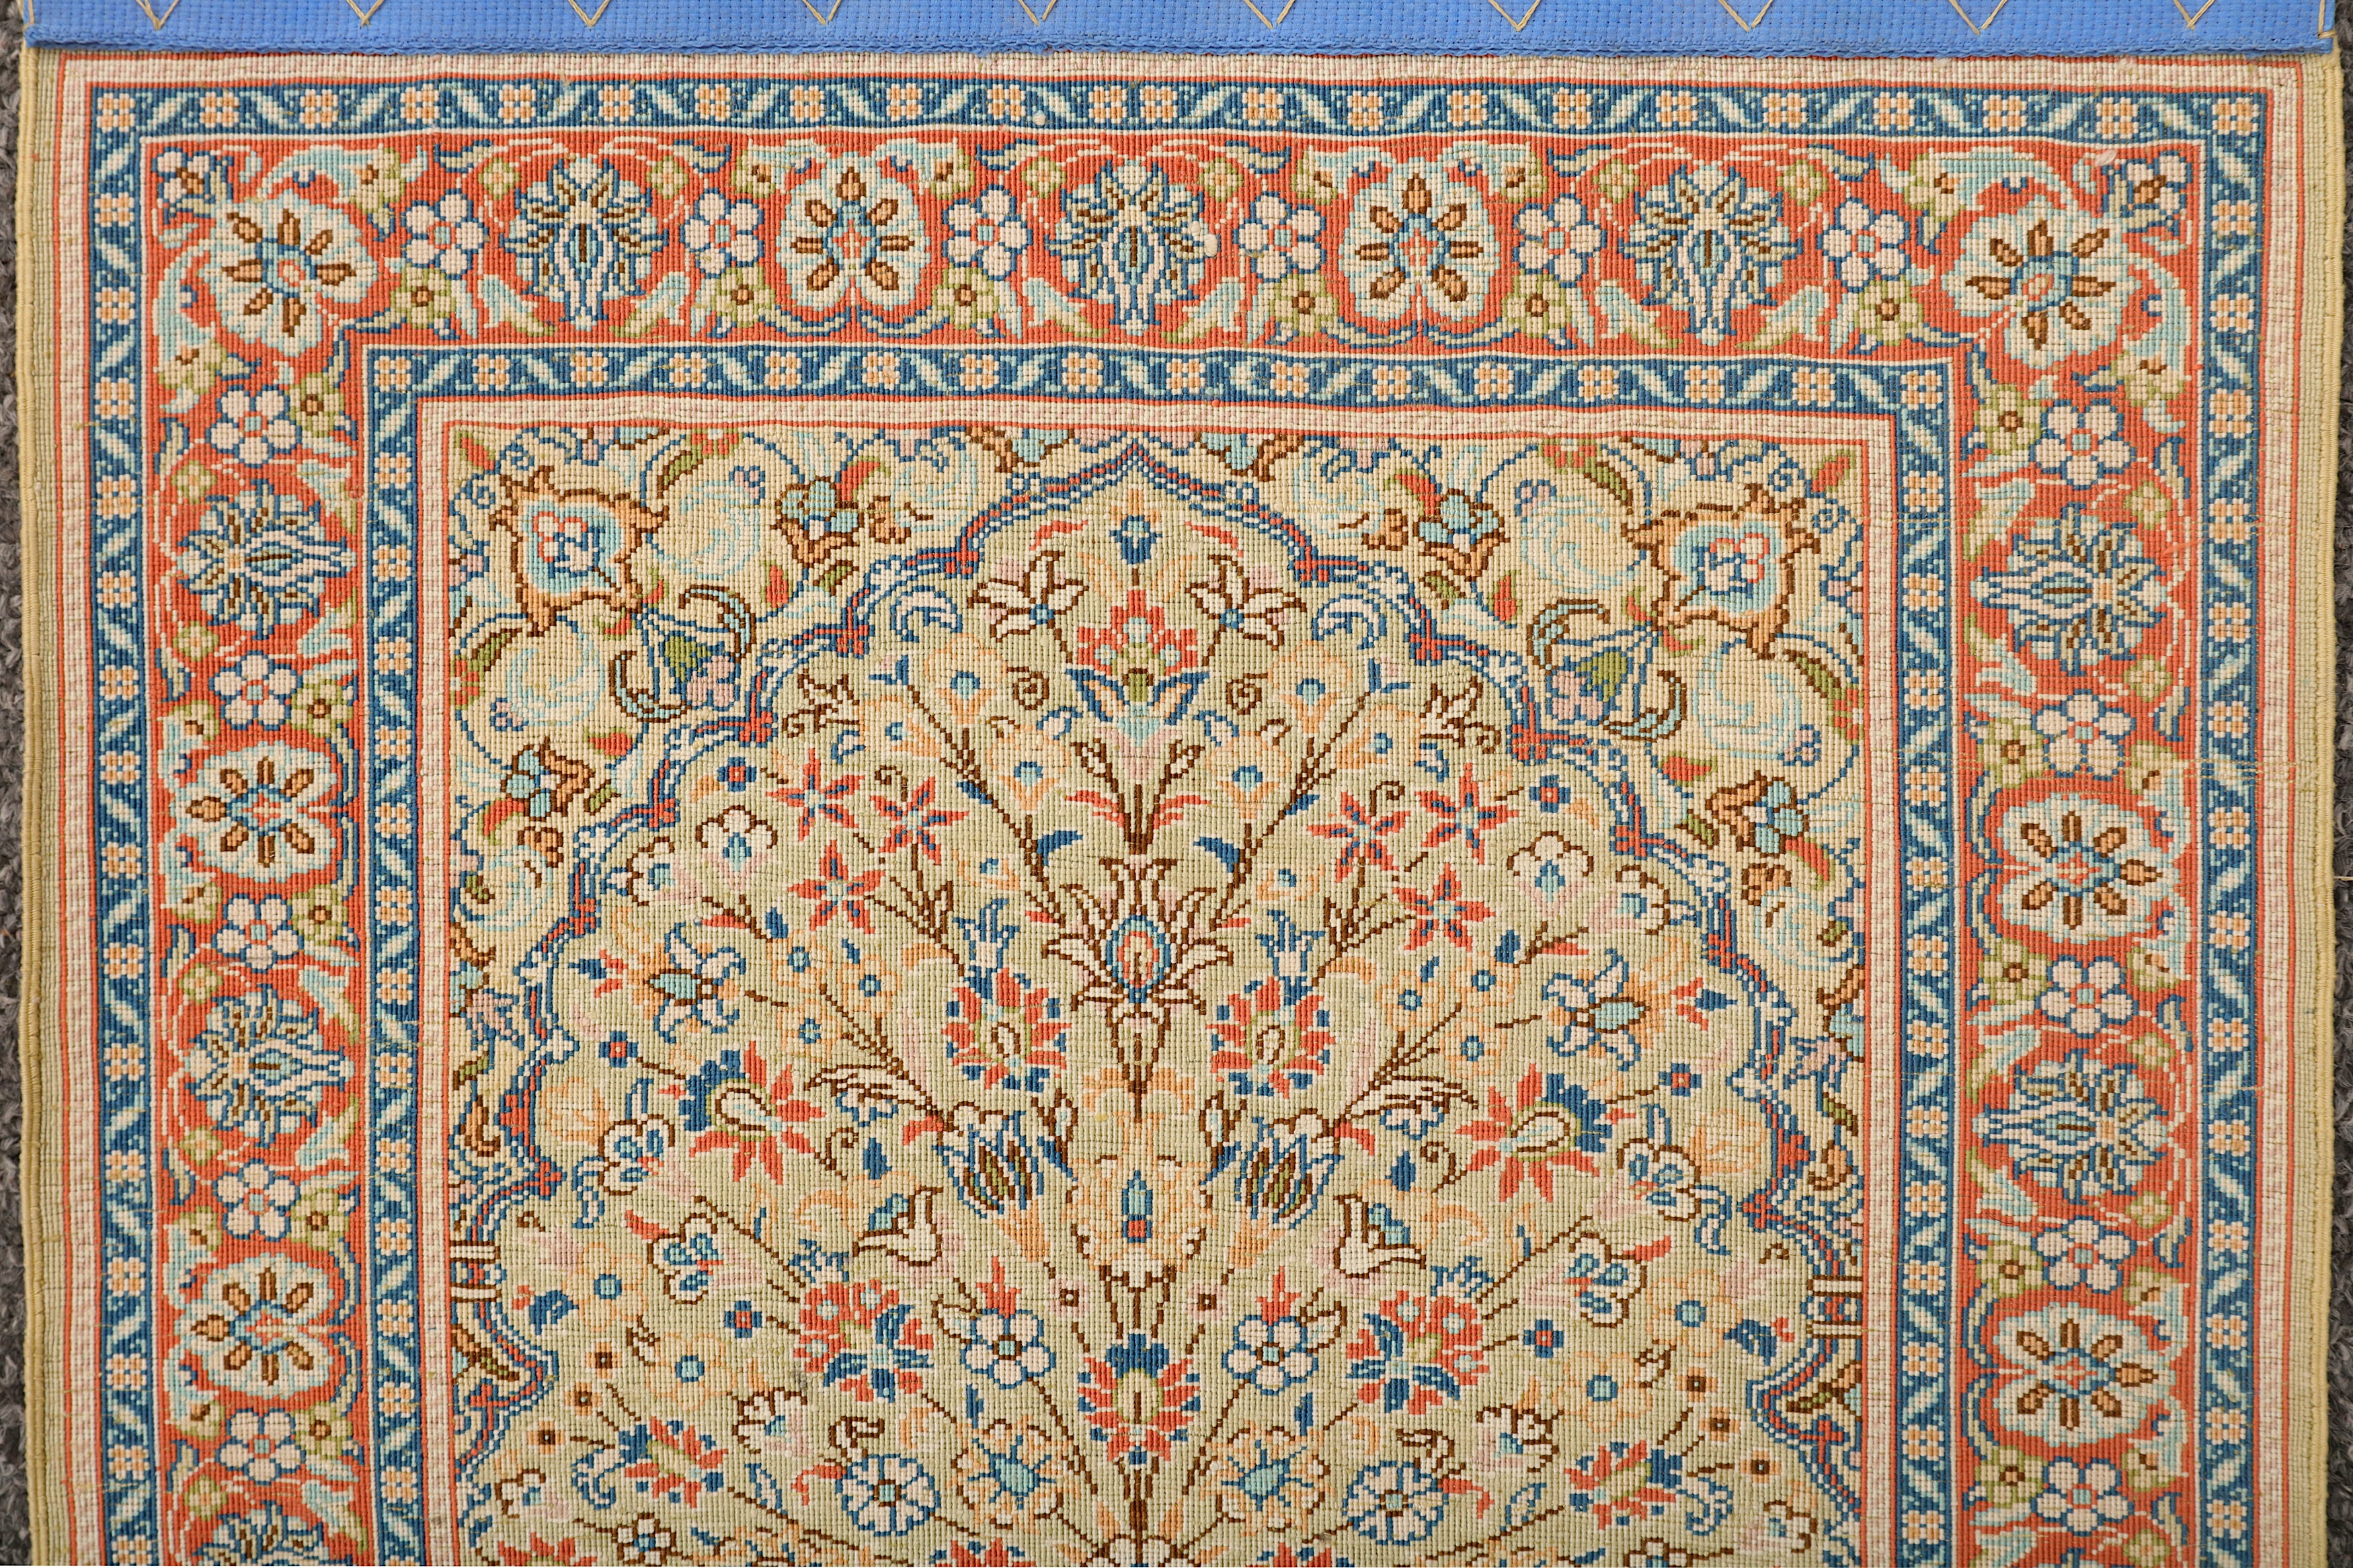 AN EXTREMELY FINE SILK HEREKE MAT, TURKEY - Image 5 of 5